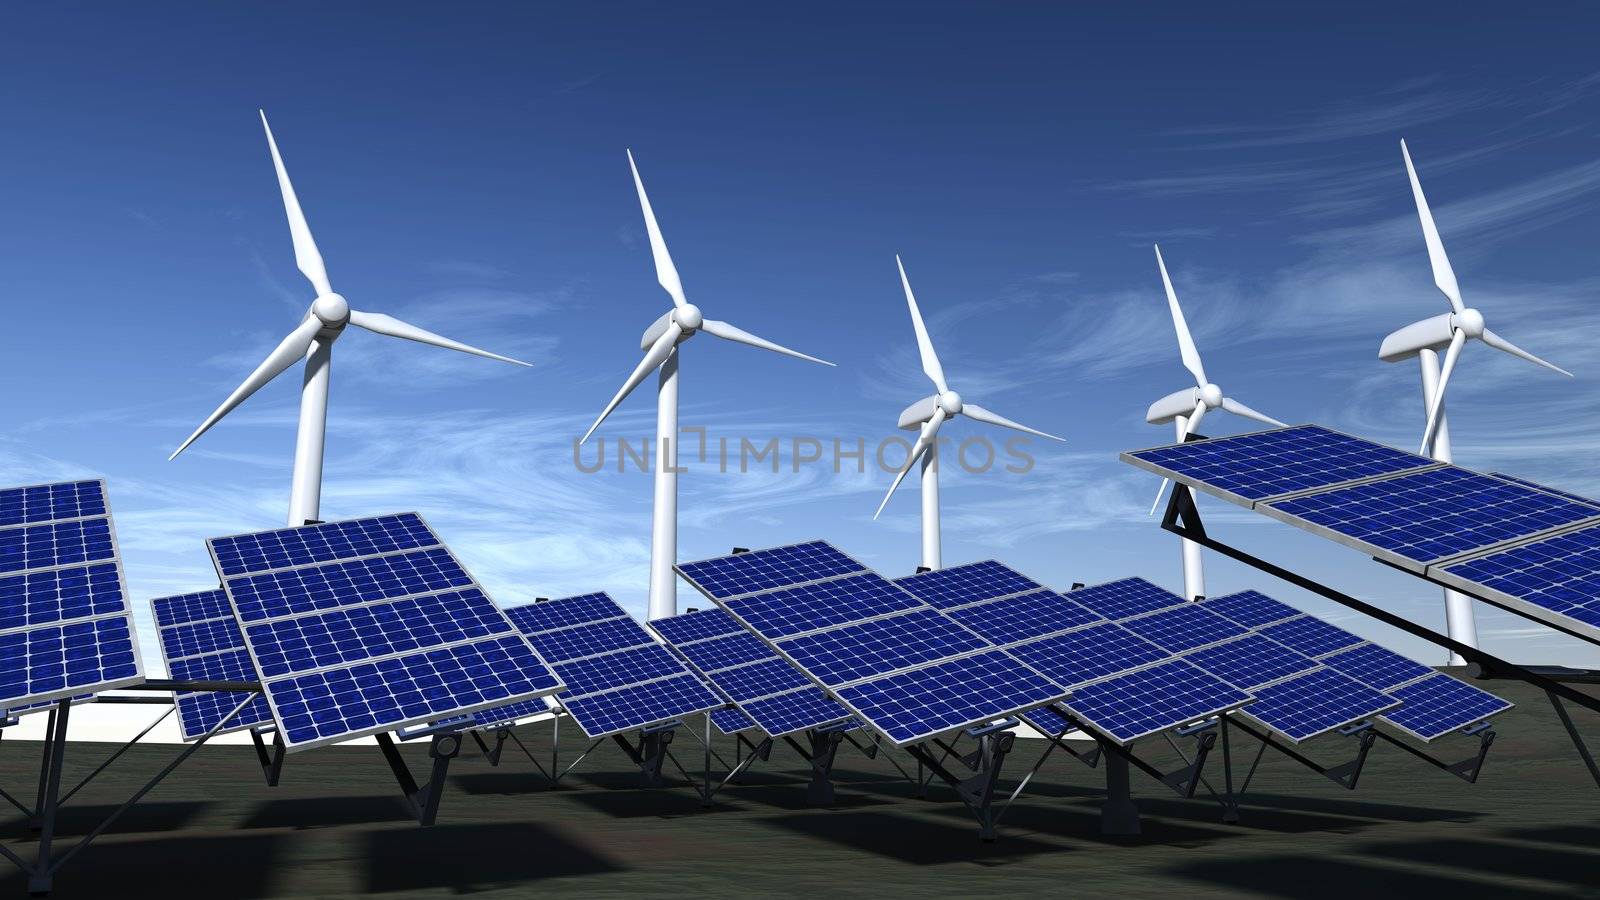 Wind turbines and solar panels with a blue sky by shkyo30